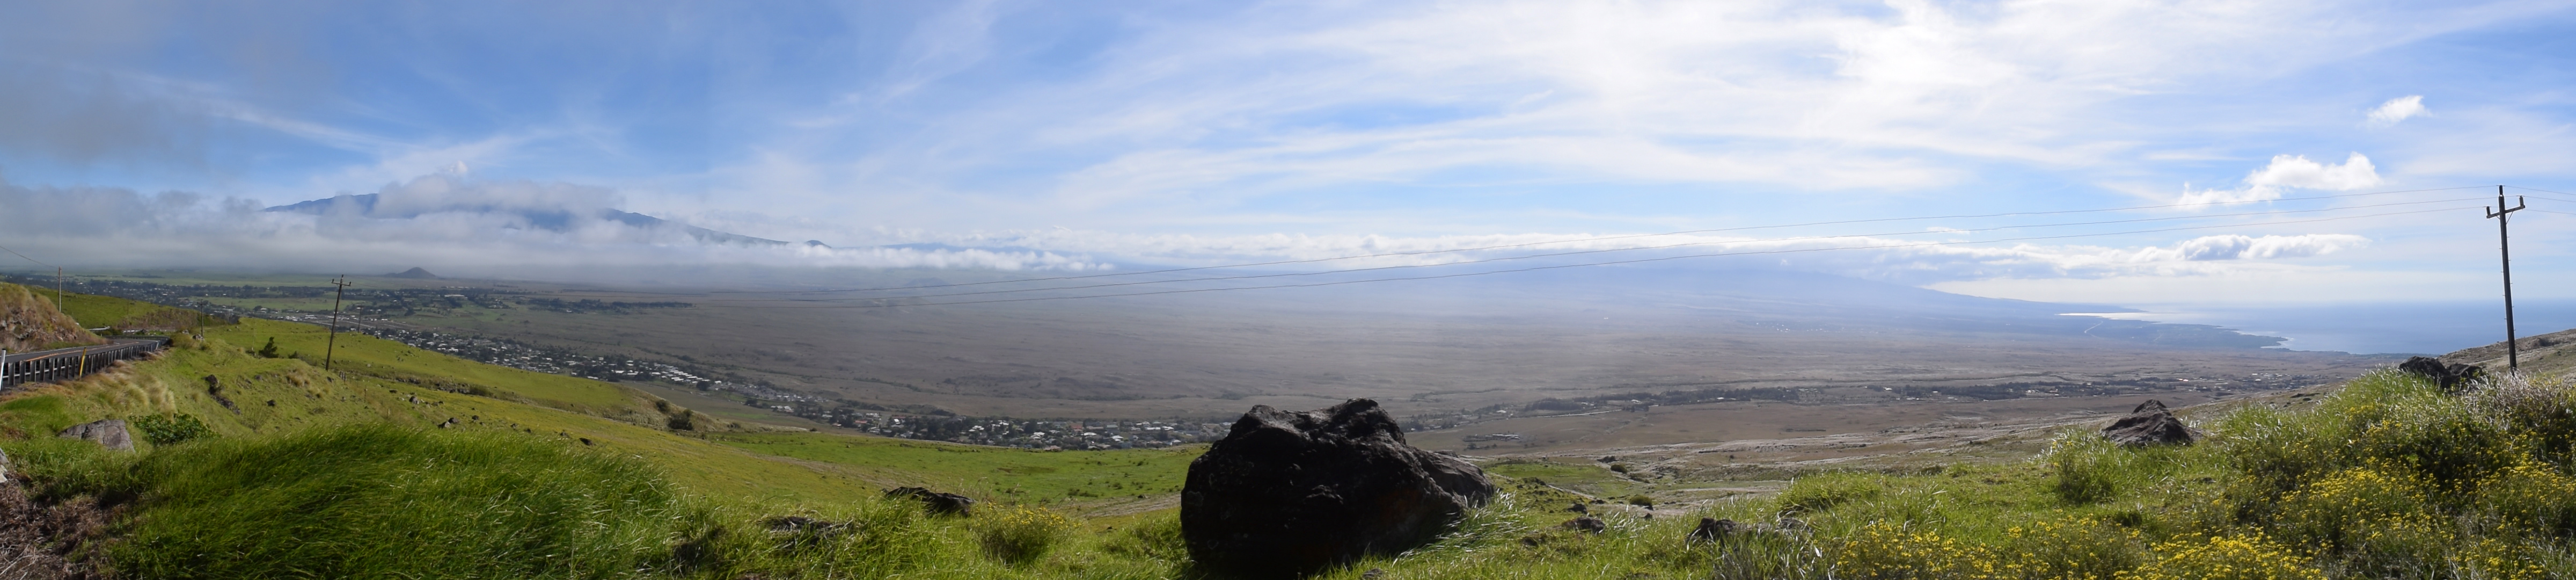 View From Kohala Highlands